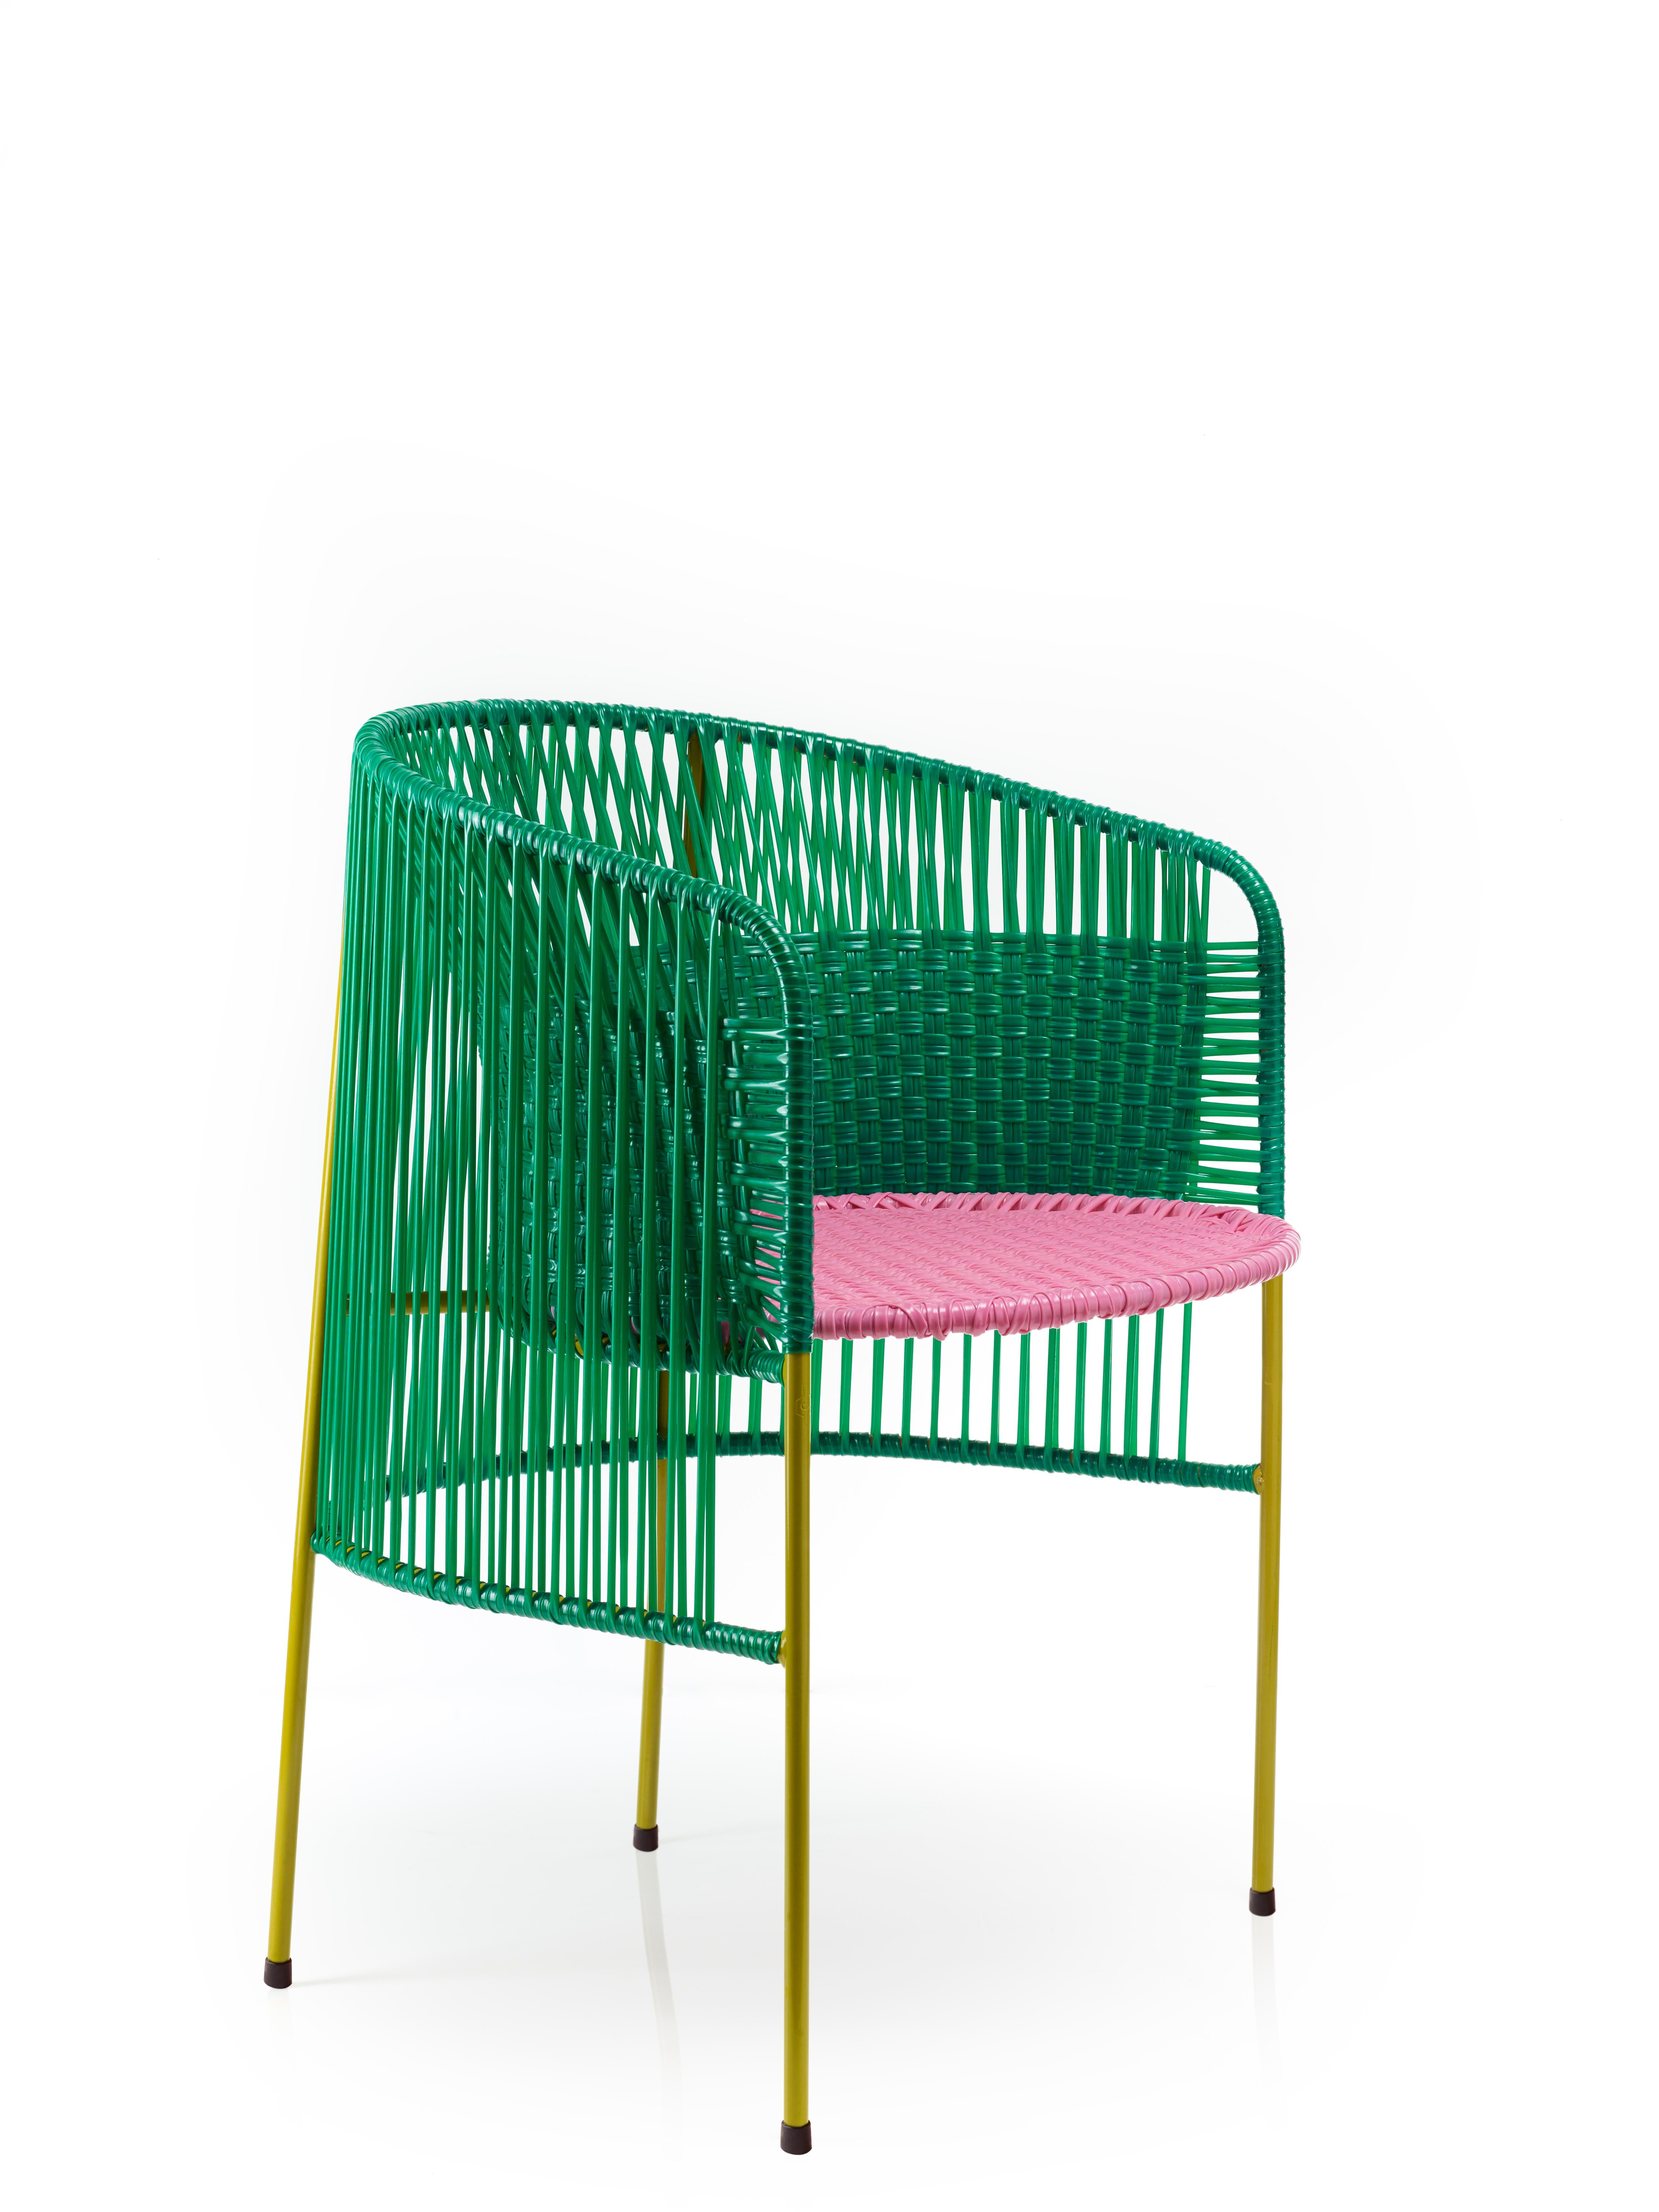 Set of 4 Green caribe dining chair by Sebastian Herkner
Materials: Galvanized and powder-coated tubular steel. PVC strings are made from recycled plastic.
Technique: Made from recycled plastic and weaved by local craftspeople in Colombia.